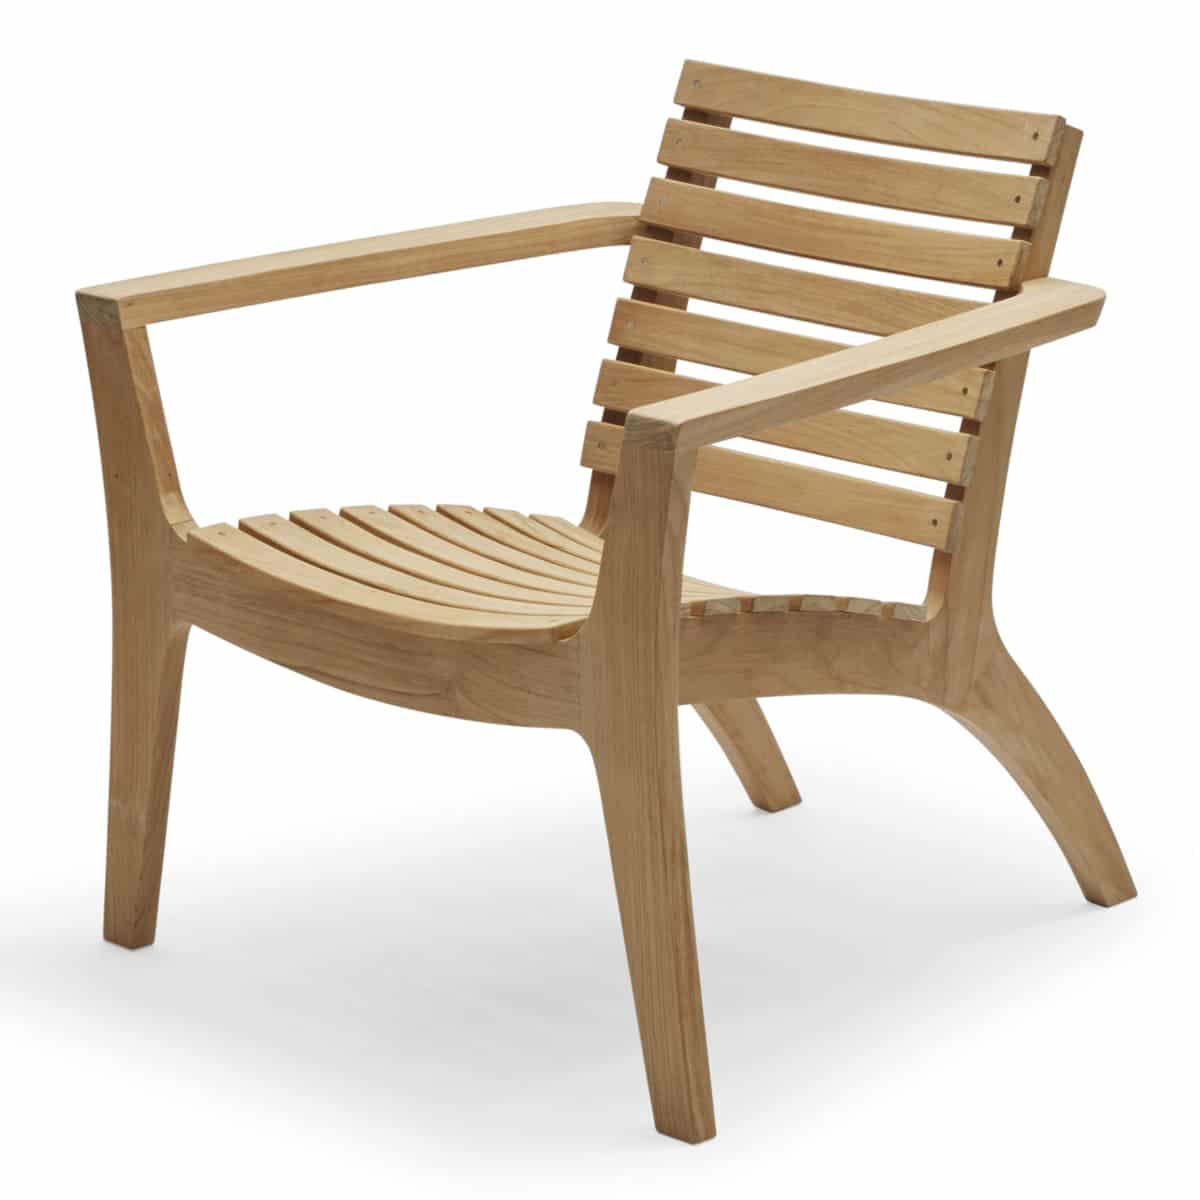 Modern wicker chair in Scandinavian style armchair with upholstery made from untreated natural rattan